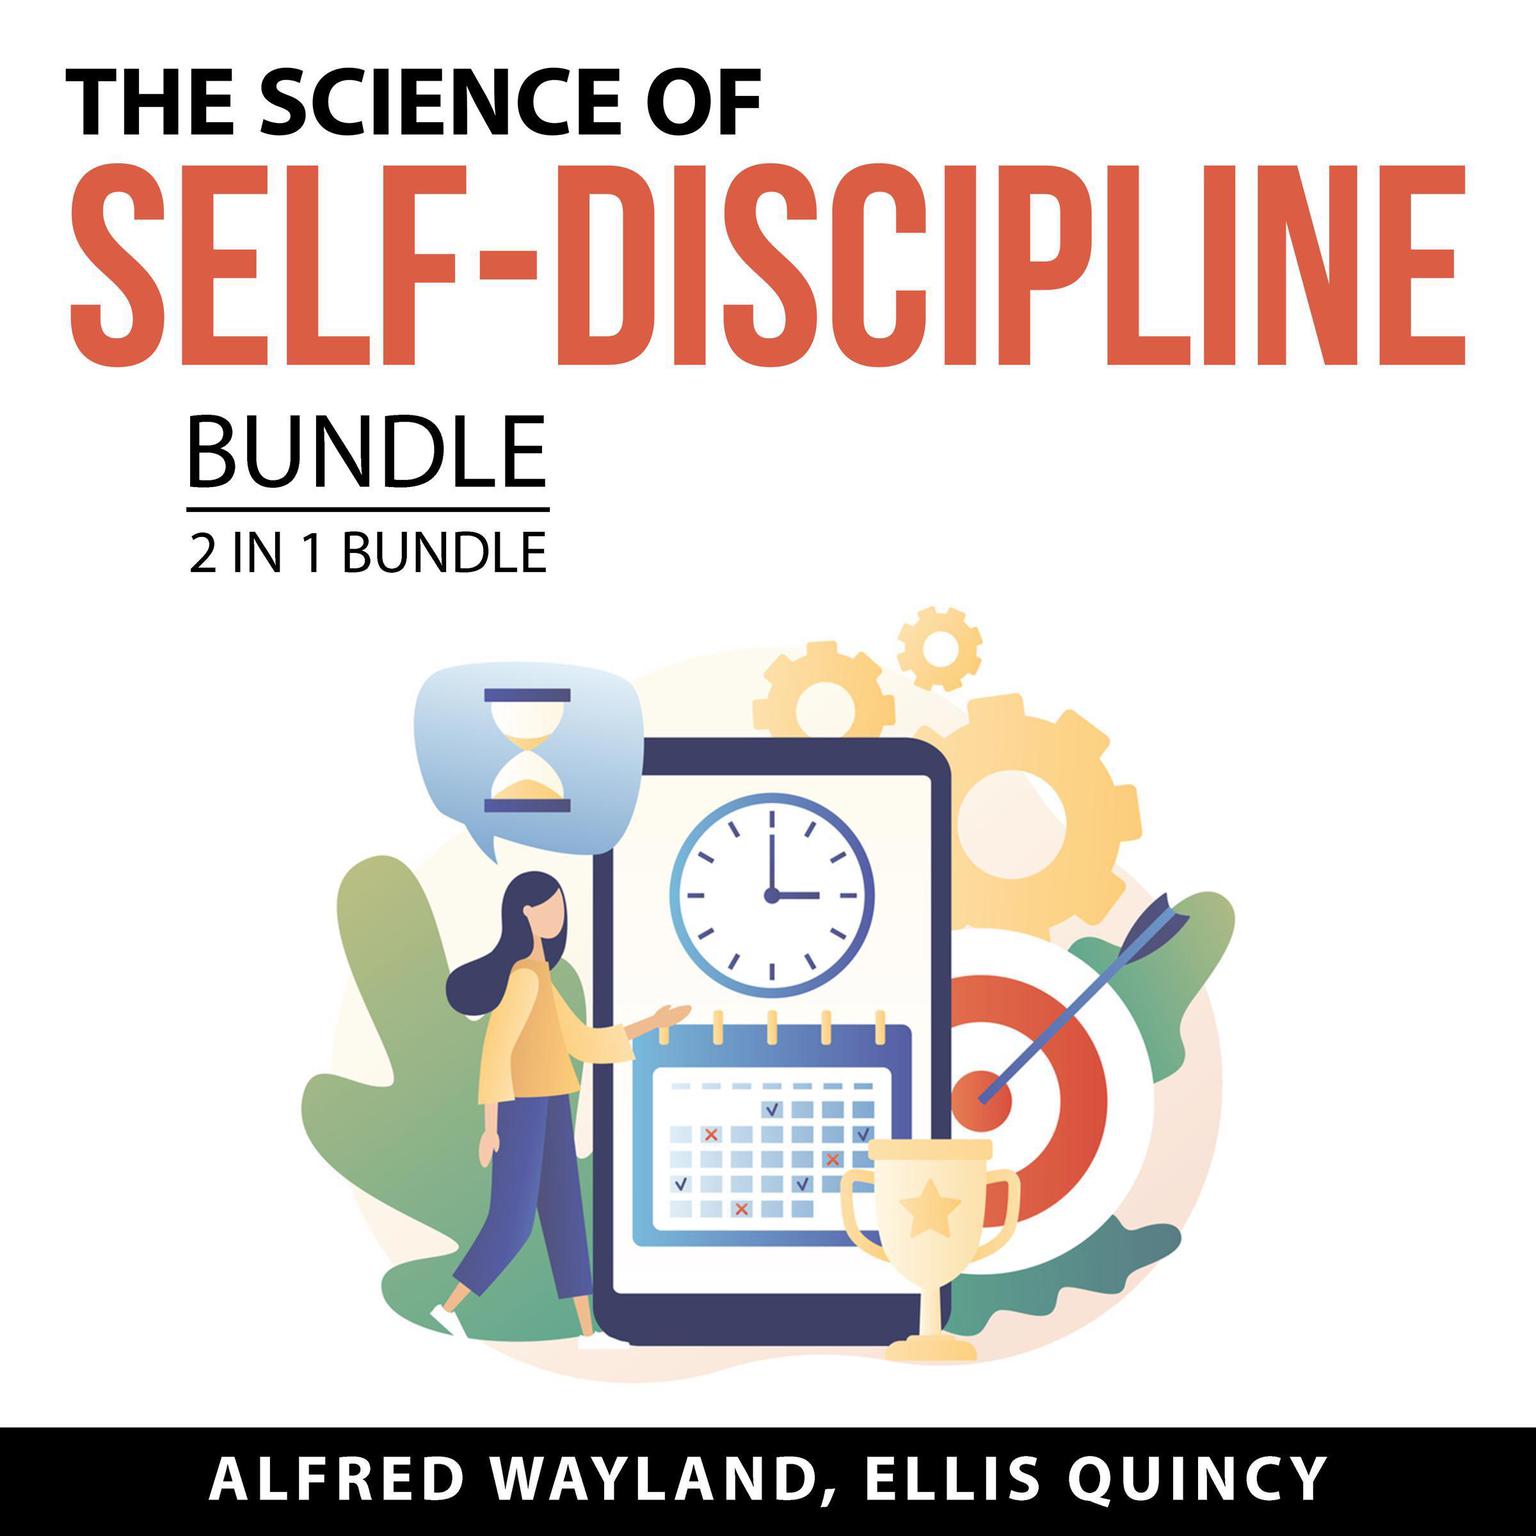 The Science of Self-Discipline Bundle, 2 in 1 Bundle: Level Up Your Self-Discipline and Transforming Life With Self-Discipline Audiobook, by Alfred Wayland